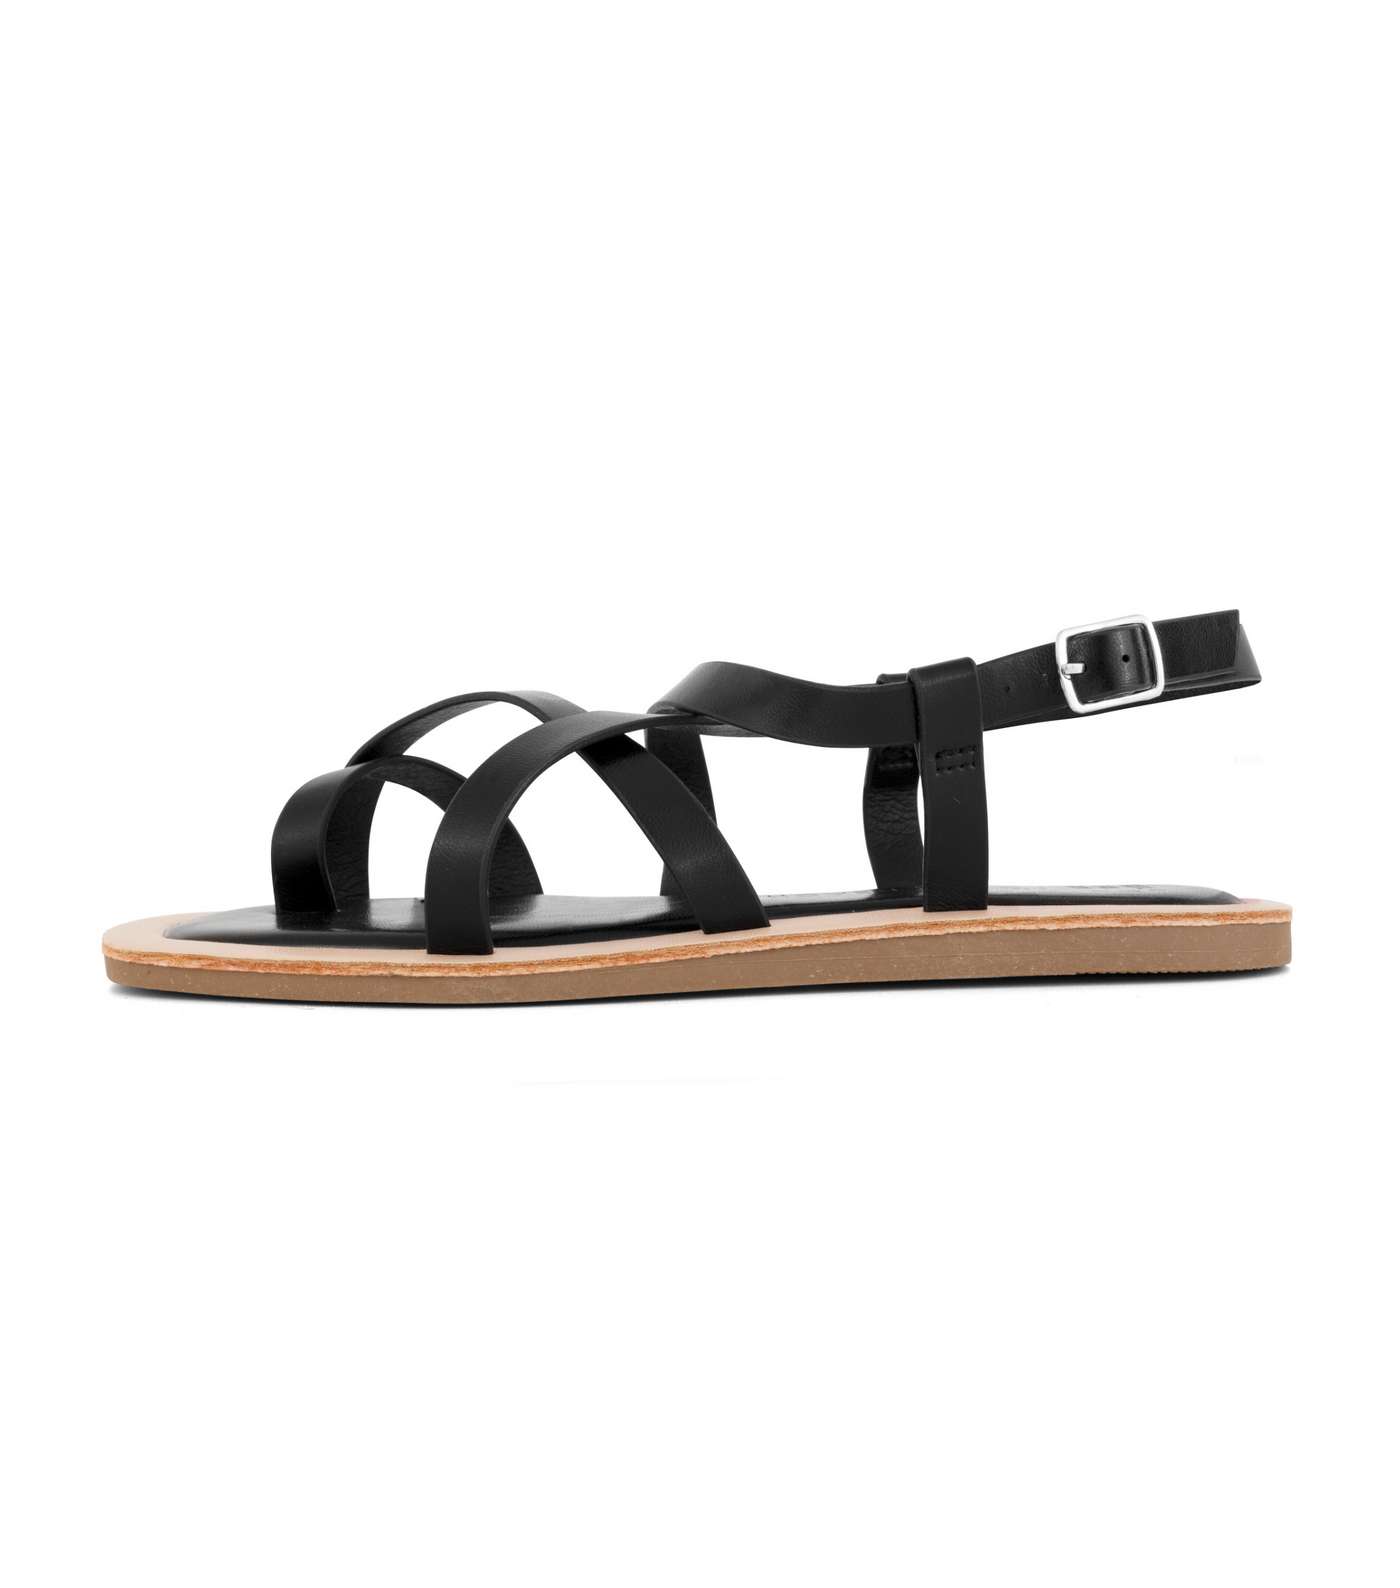 South Beach Black Strappy Gladiator Sandals Image 2